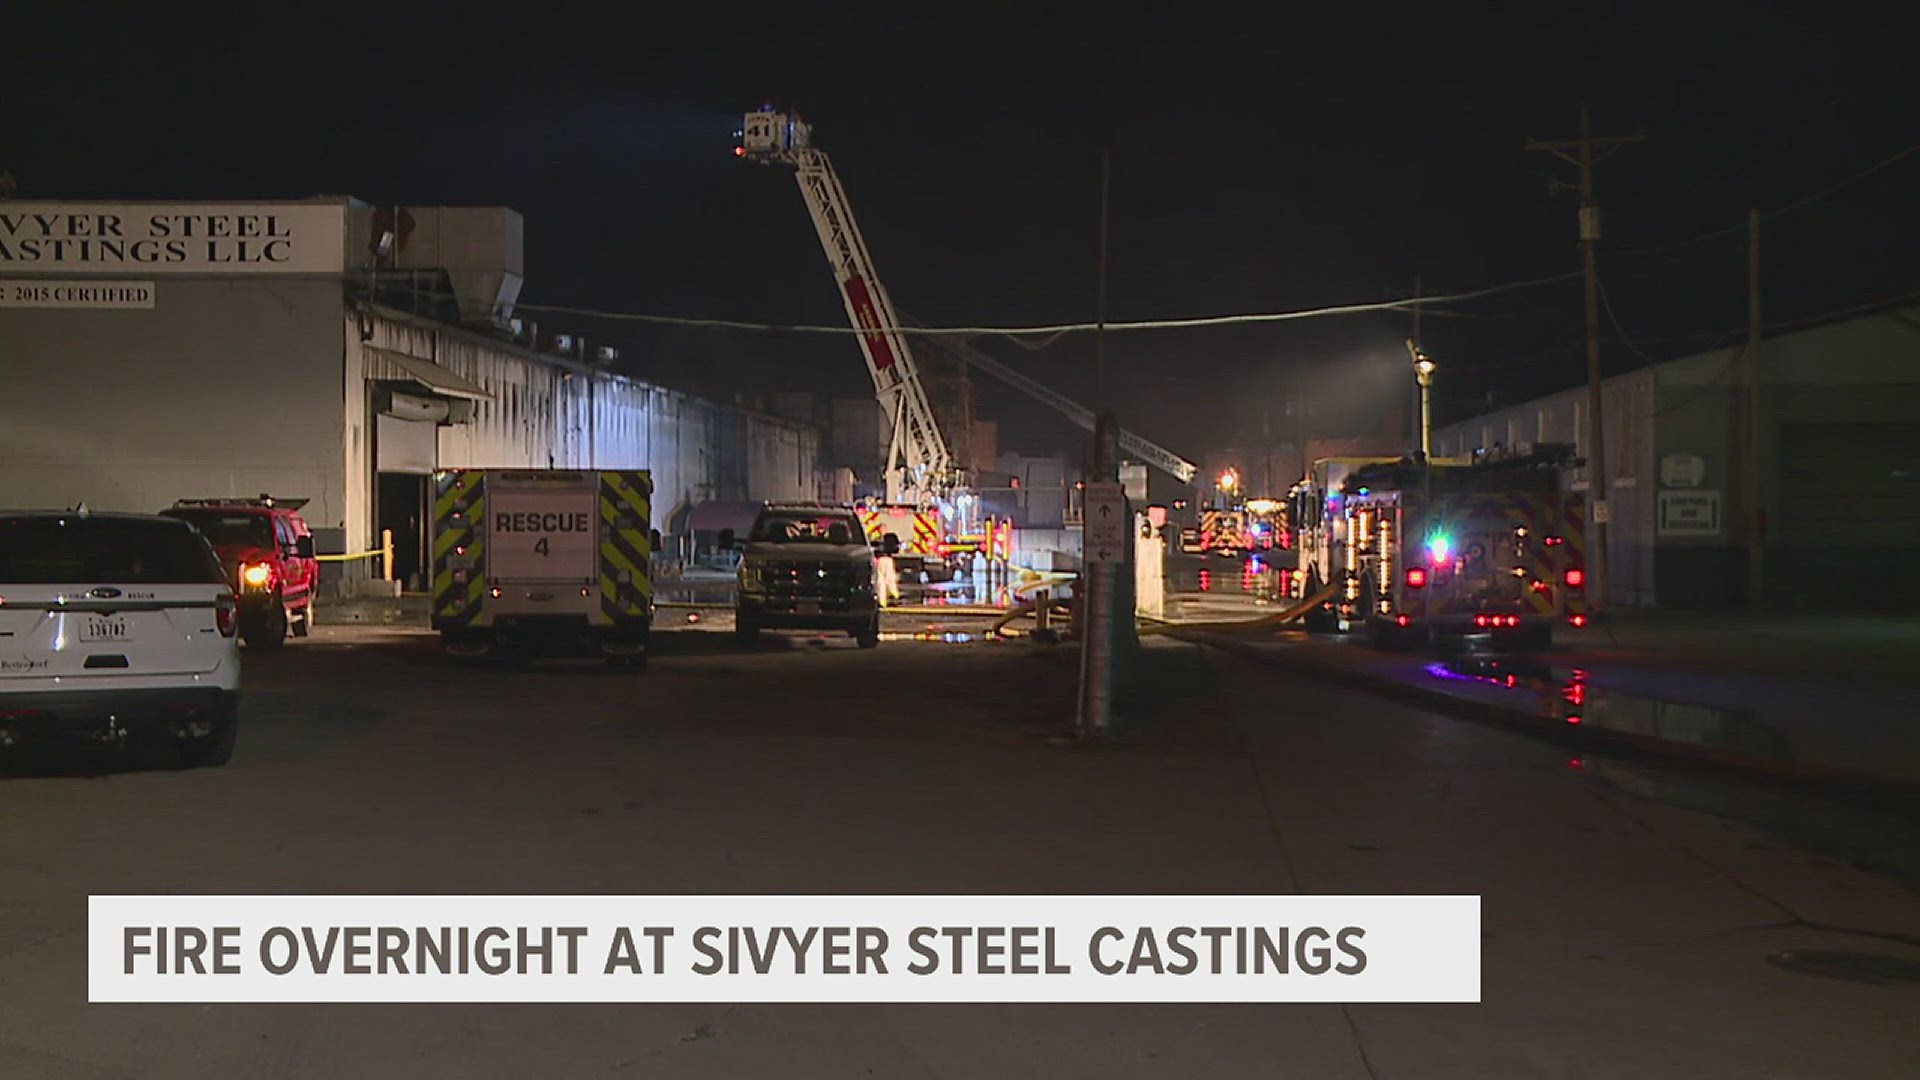 WQAD received a report of the fire around 10 p.m.